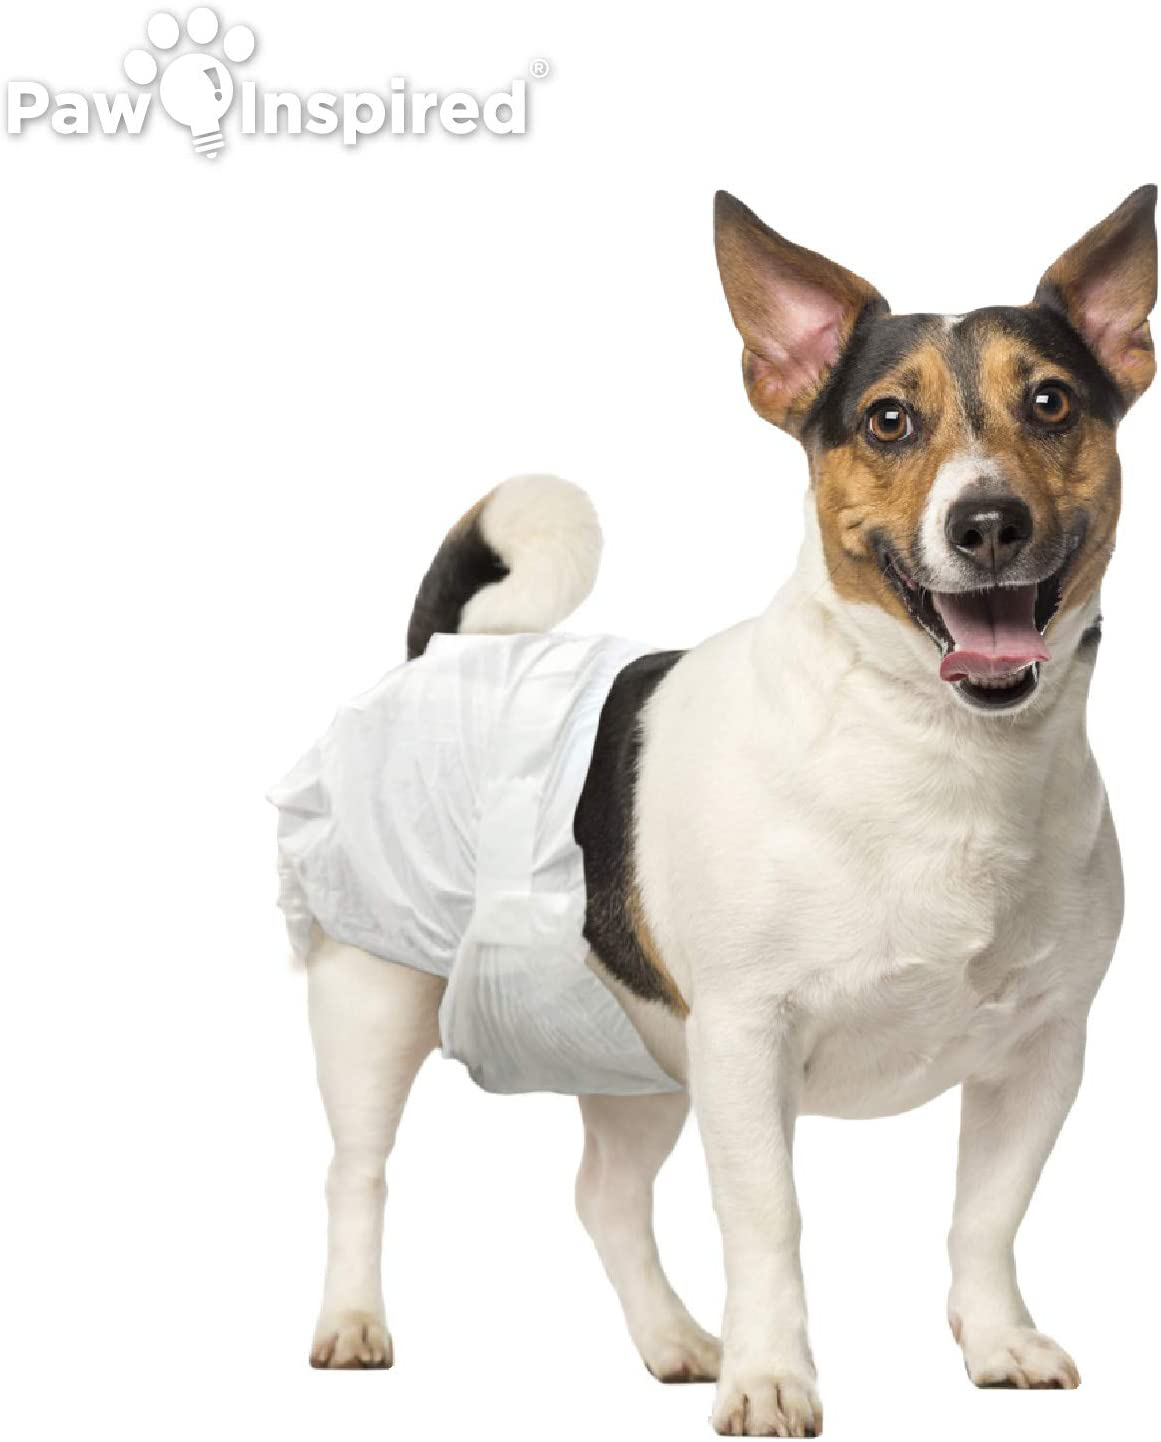 PAW INSPIRED Ultra Protection Female Disposable Dog Diapers